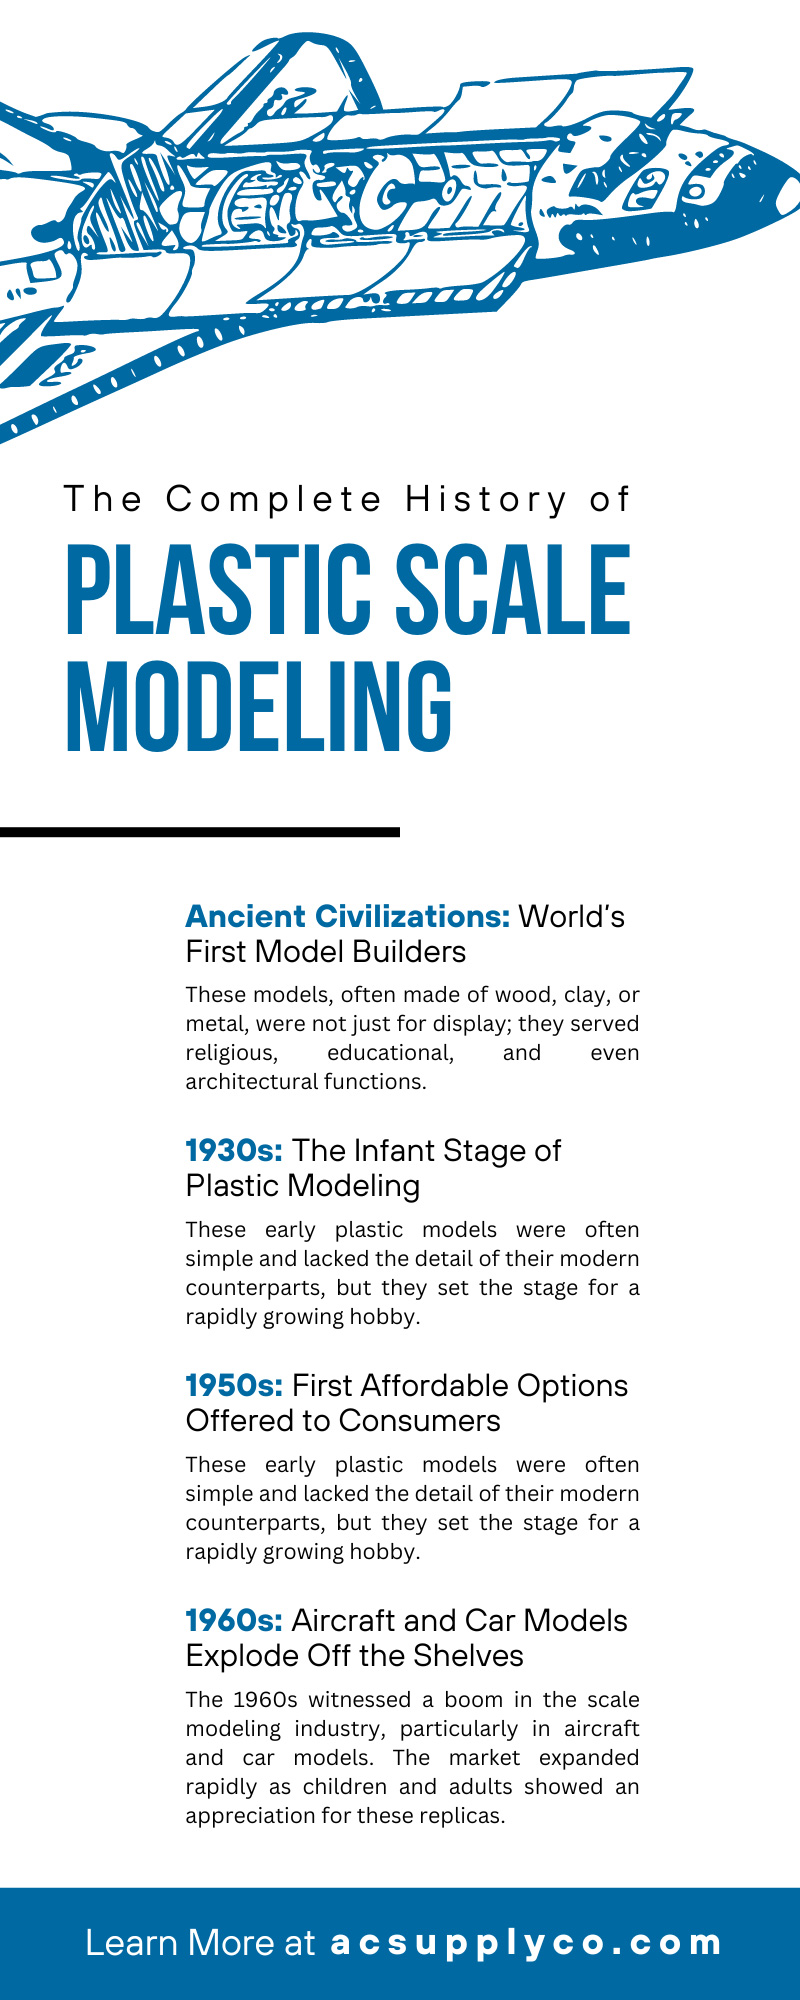 The Complete History of Plastic Scale Modeling